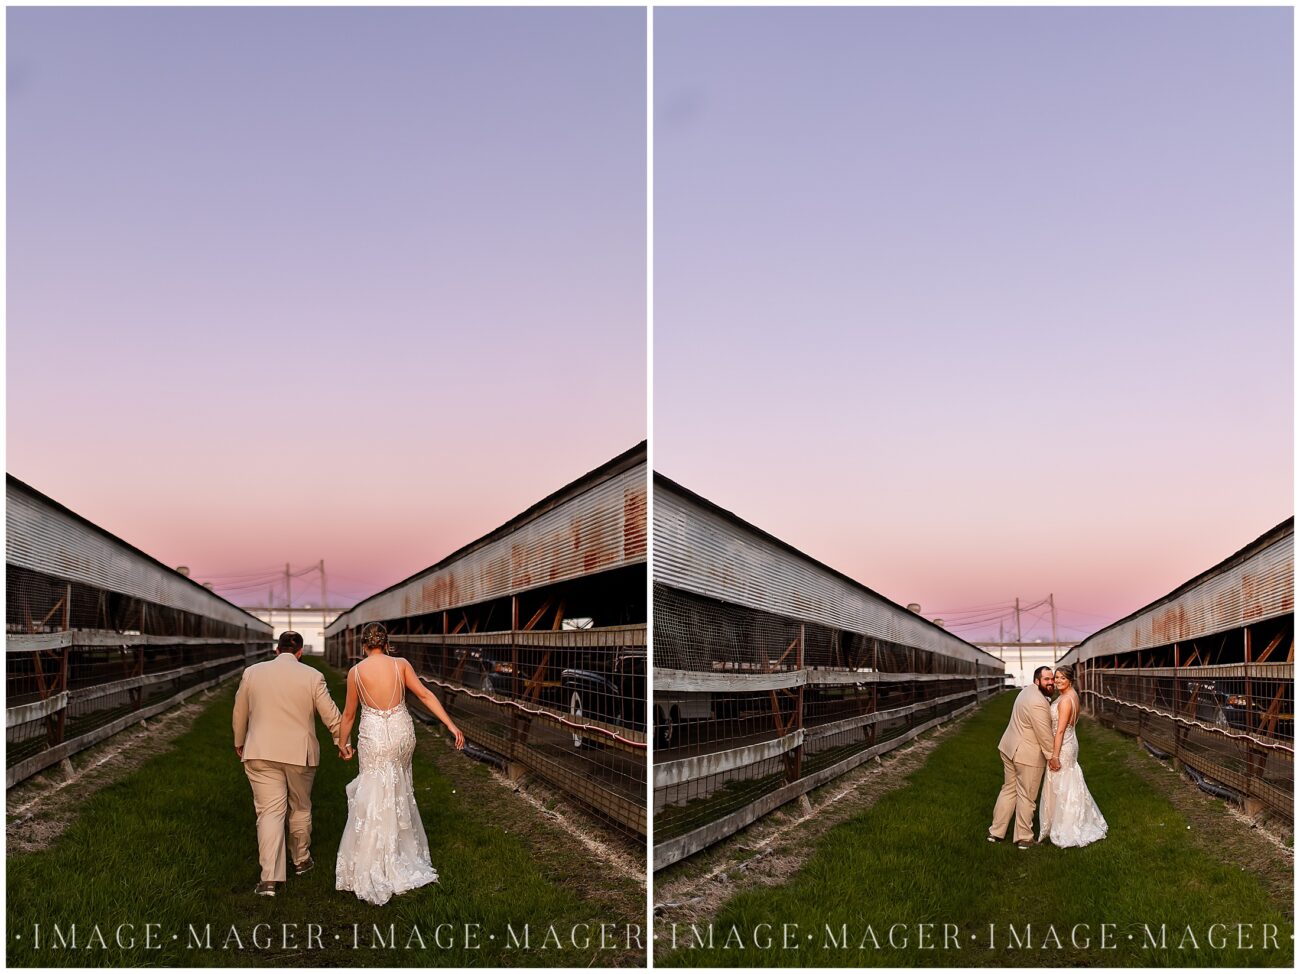 A small town wedding for Casey and Adam. The bride and groom pose for two portraits at blue hour at the Kankakee County Fairgrounds.

Kankakee County Fairgrounds, Kankakee, IL.

Photo taken by Mager Image Photography.